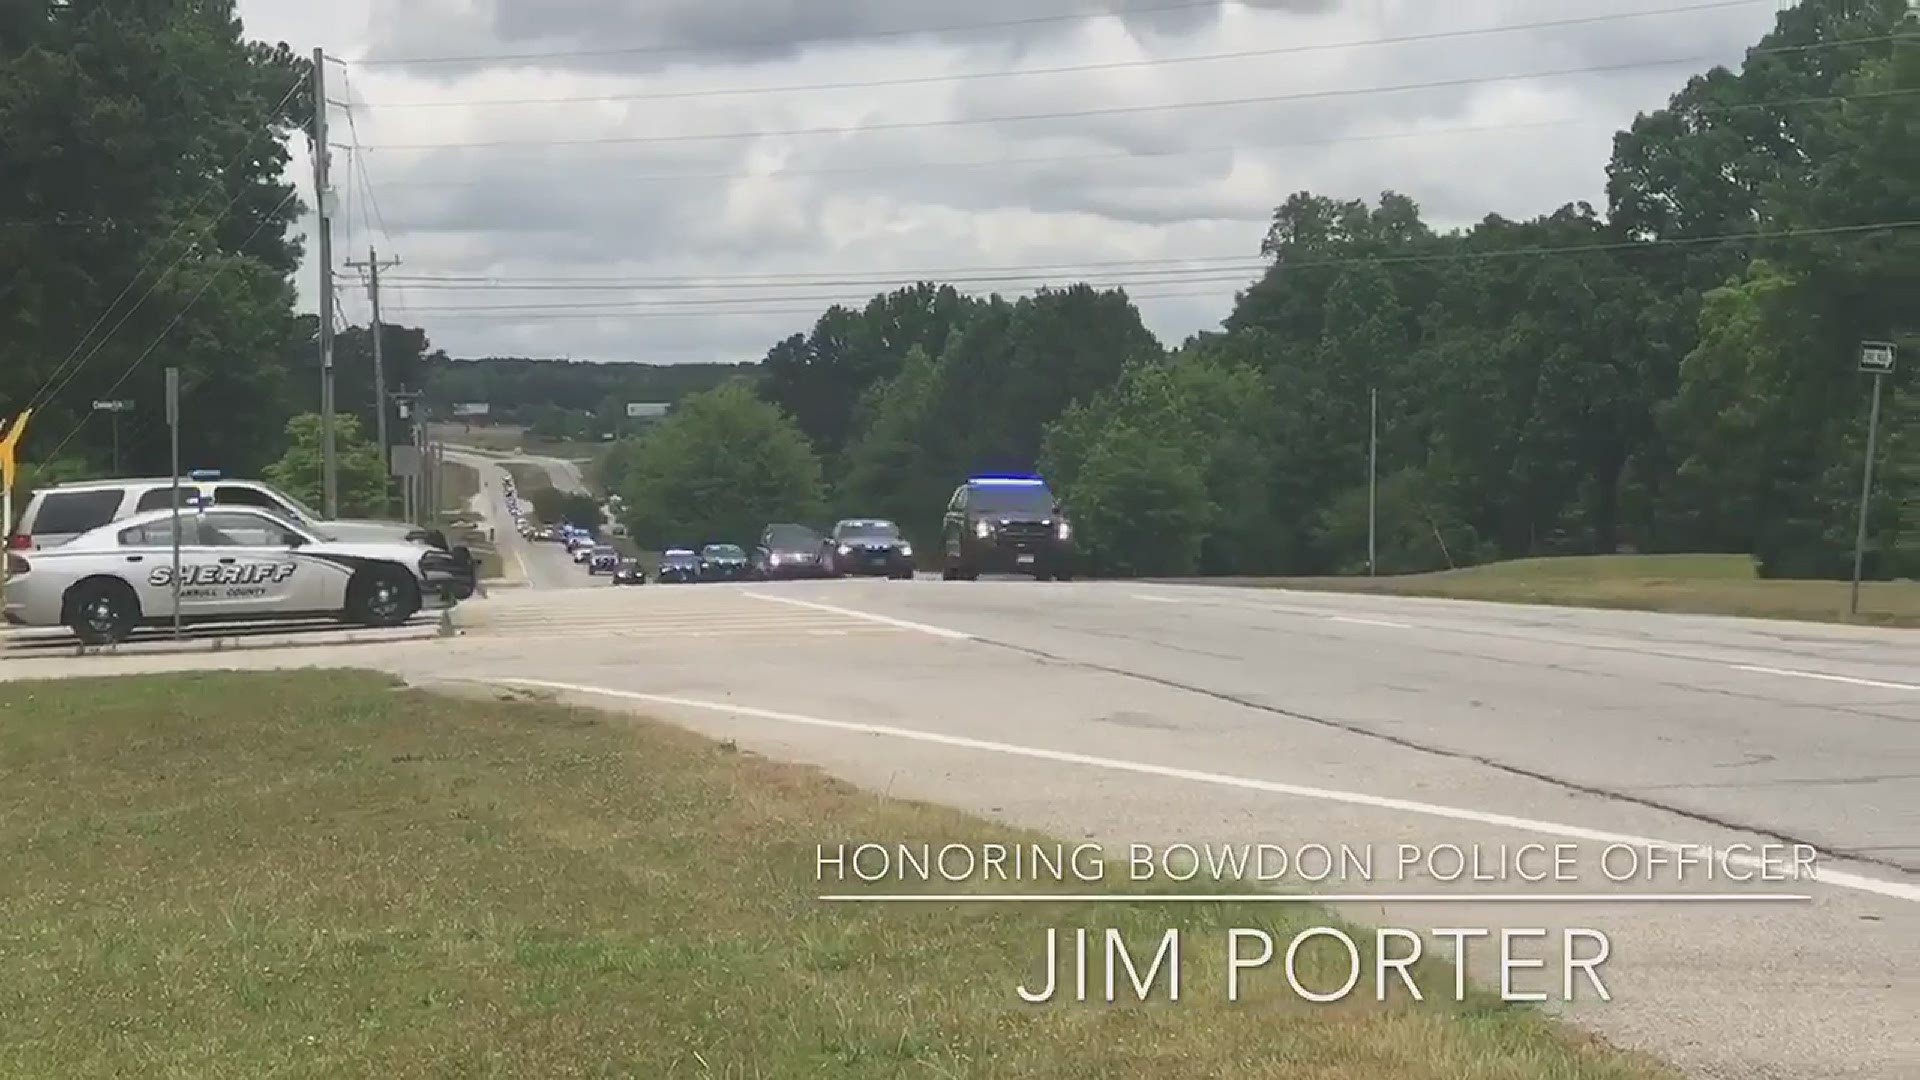 Officer Jim Porter died suddenly, Tuesday. He was remembered for his laugh, smile, and love for his job.